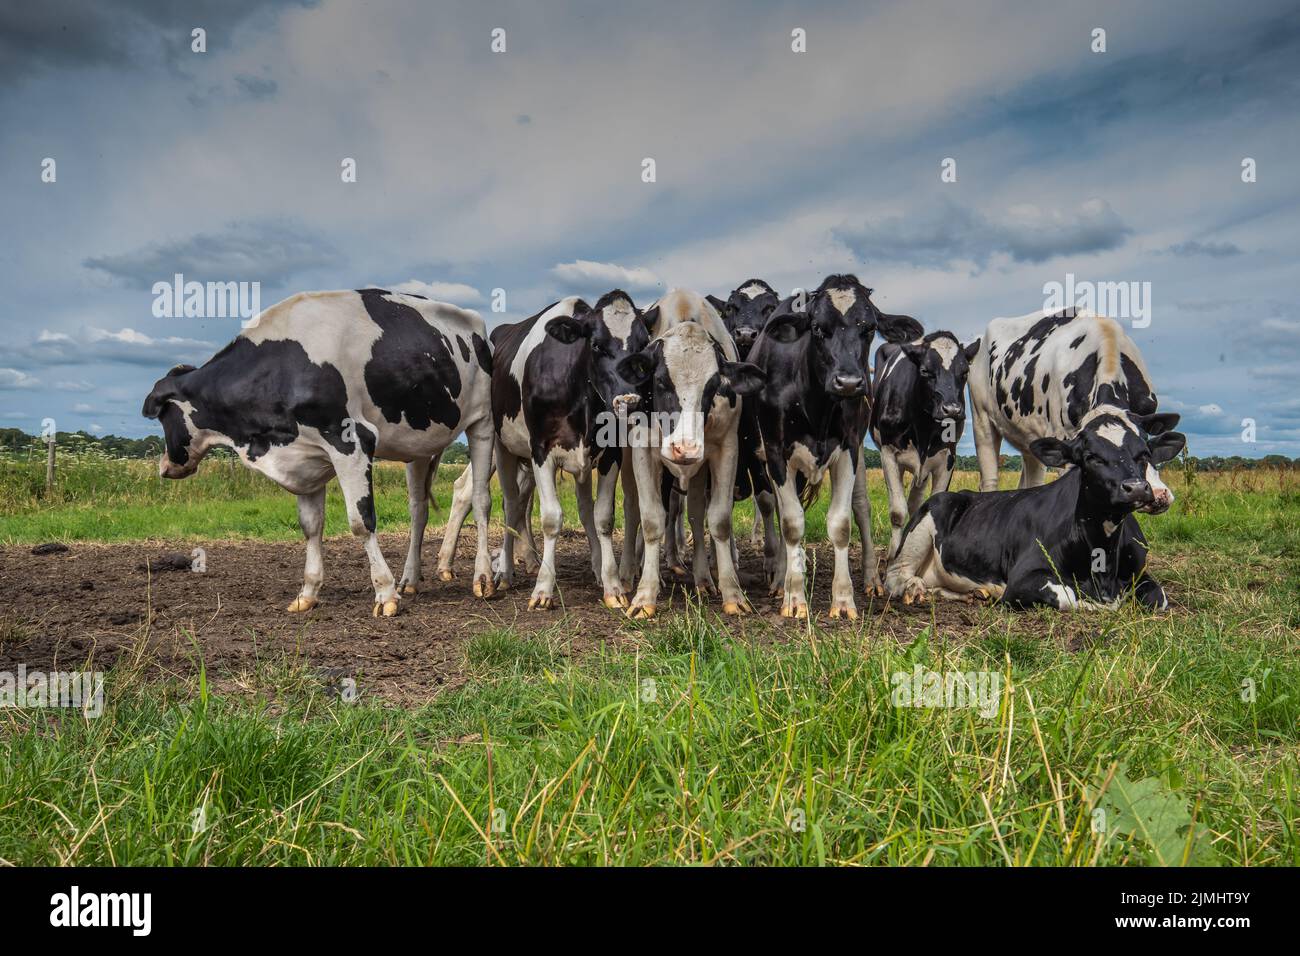 Close up of herd of flocking curious young black and white spotted cows in a natural green pasture against blue sky background with veil clouds Stock Photo